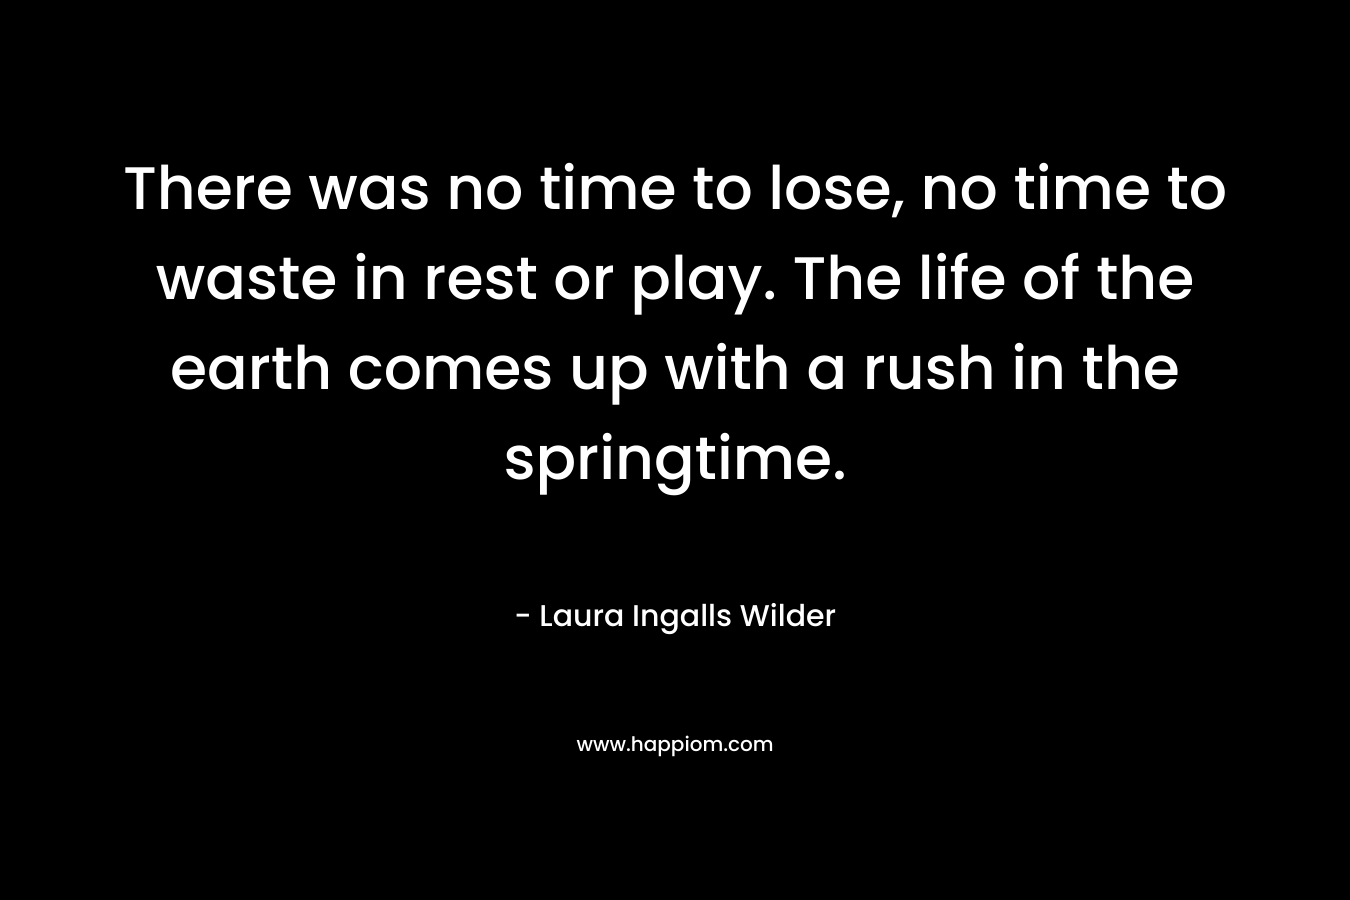 There was no time to lose, no time to waste in rest or play. The life of the earth comes up with a rush in the springtime. – Laura Ingalls Wilder